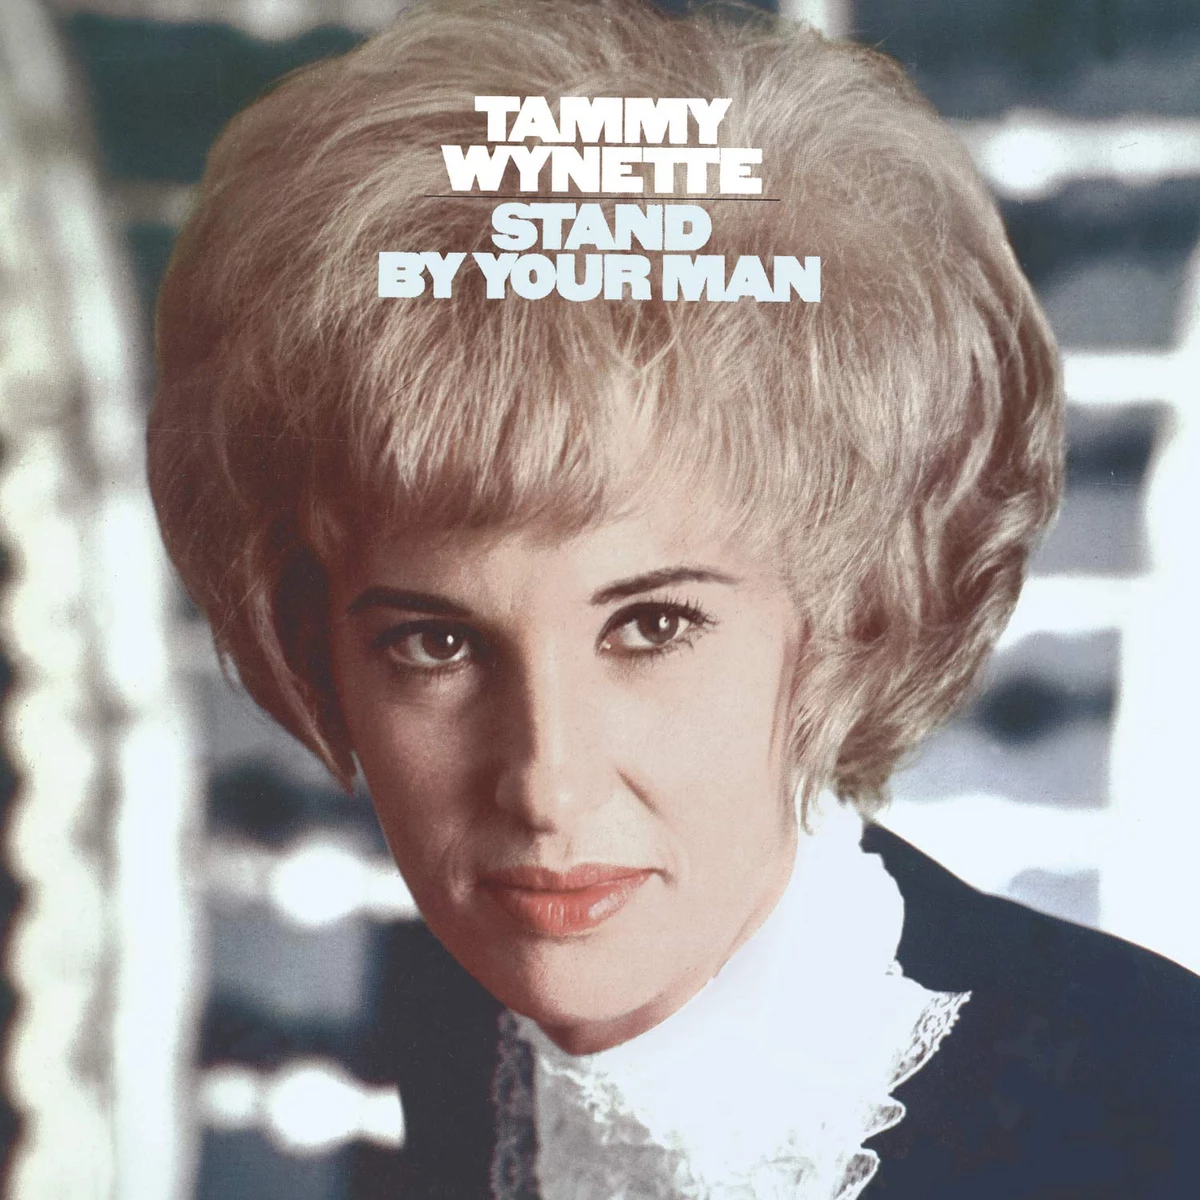 Whatever Happened To The Legendary Tammy Wynette 